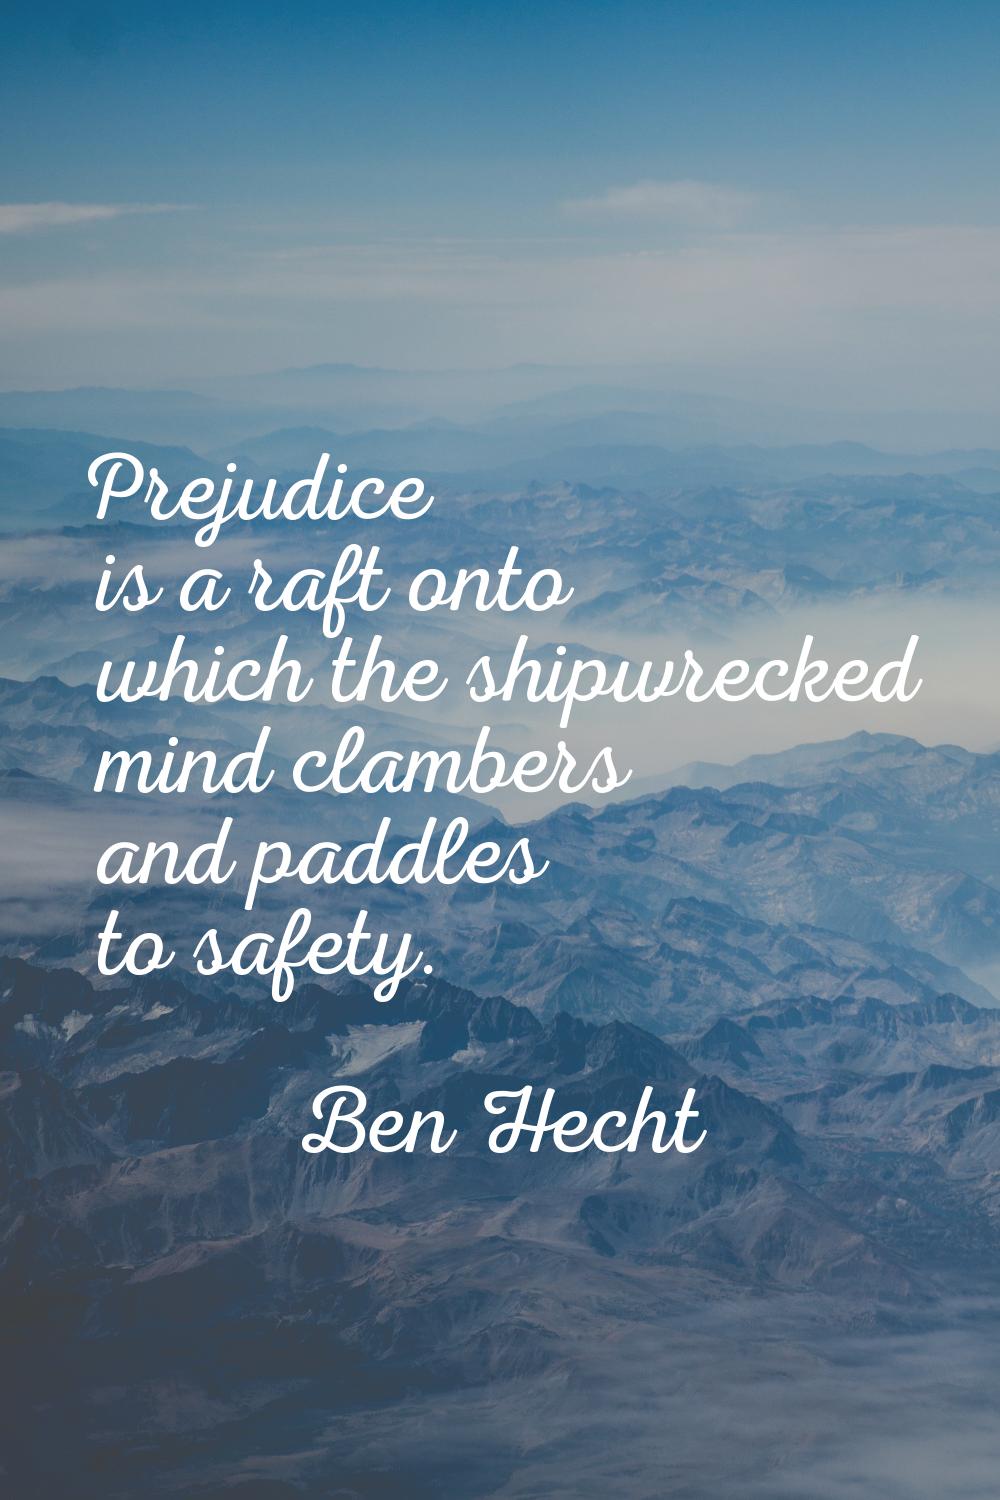 Prejudice is a raft onto which the shipwrecked mind clambers and paddles to safety.